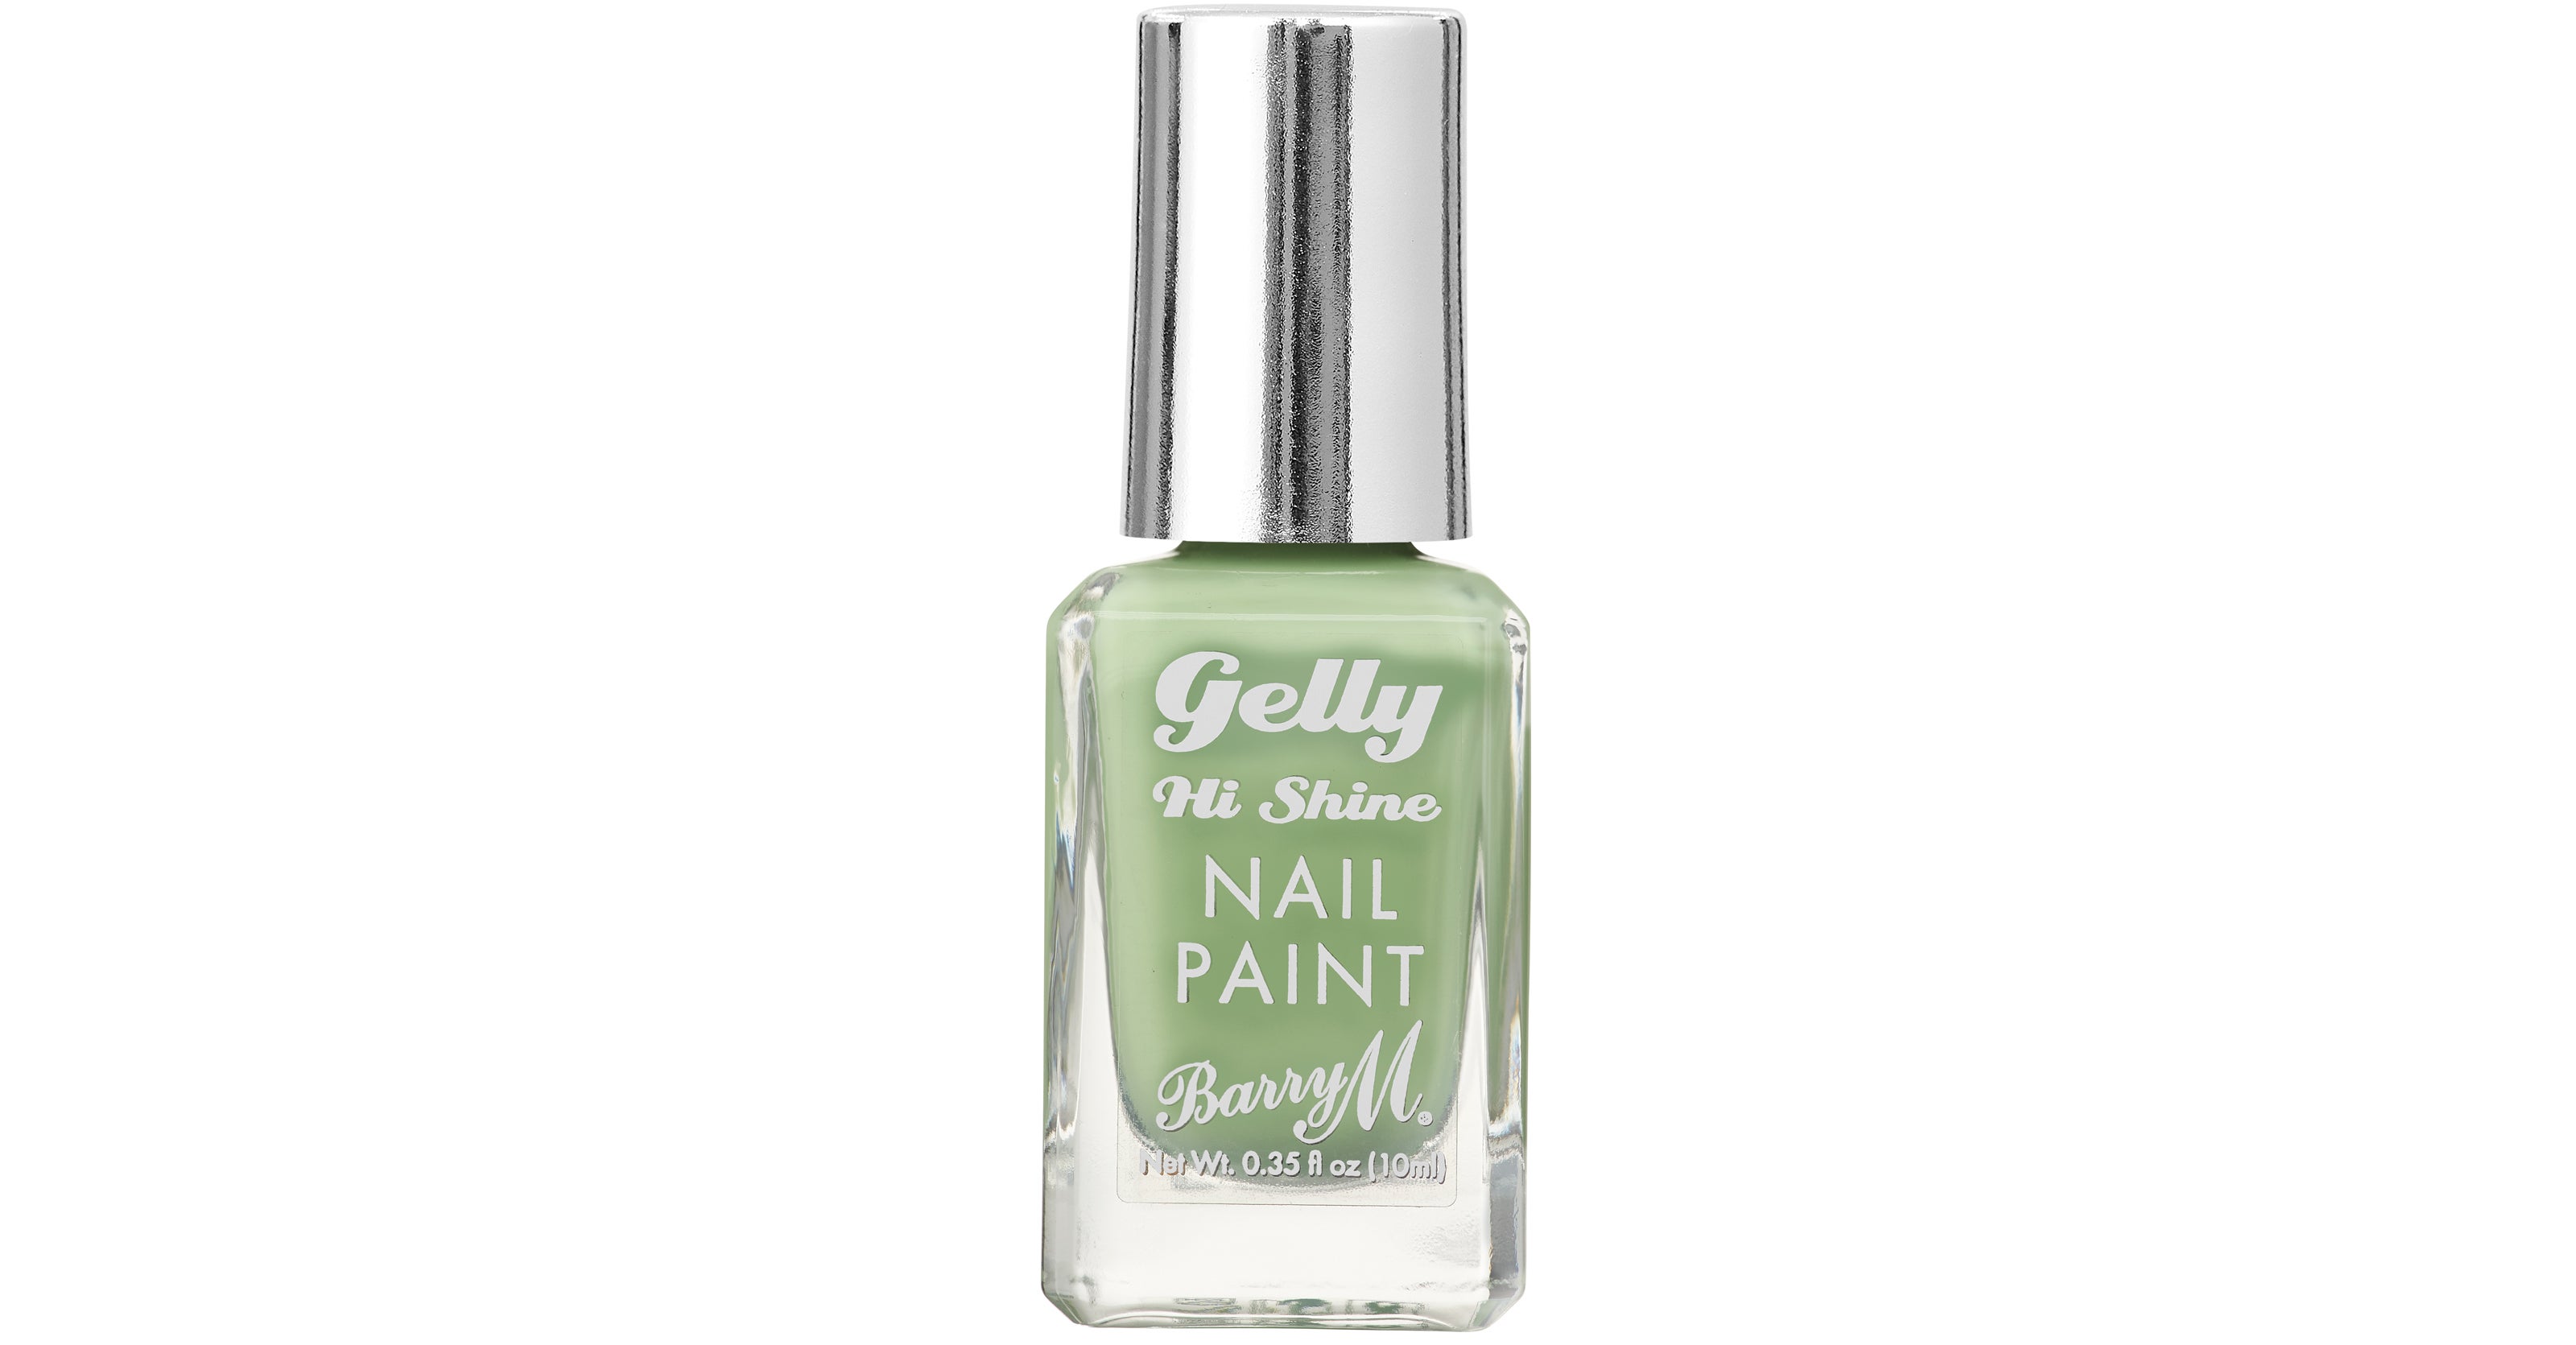 Barry M Gelly Hi Shine Nail Paint in Pistachio, ?3.99